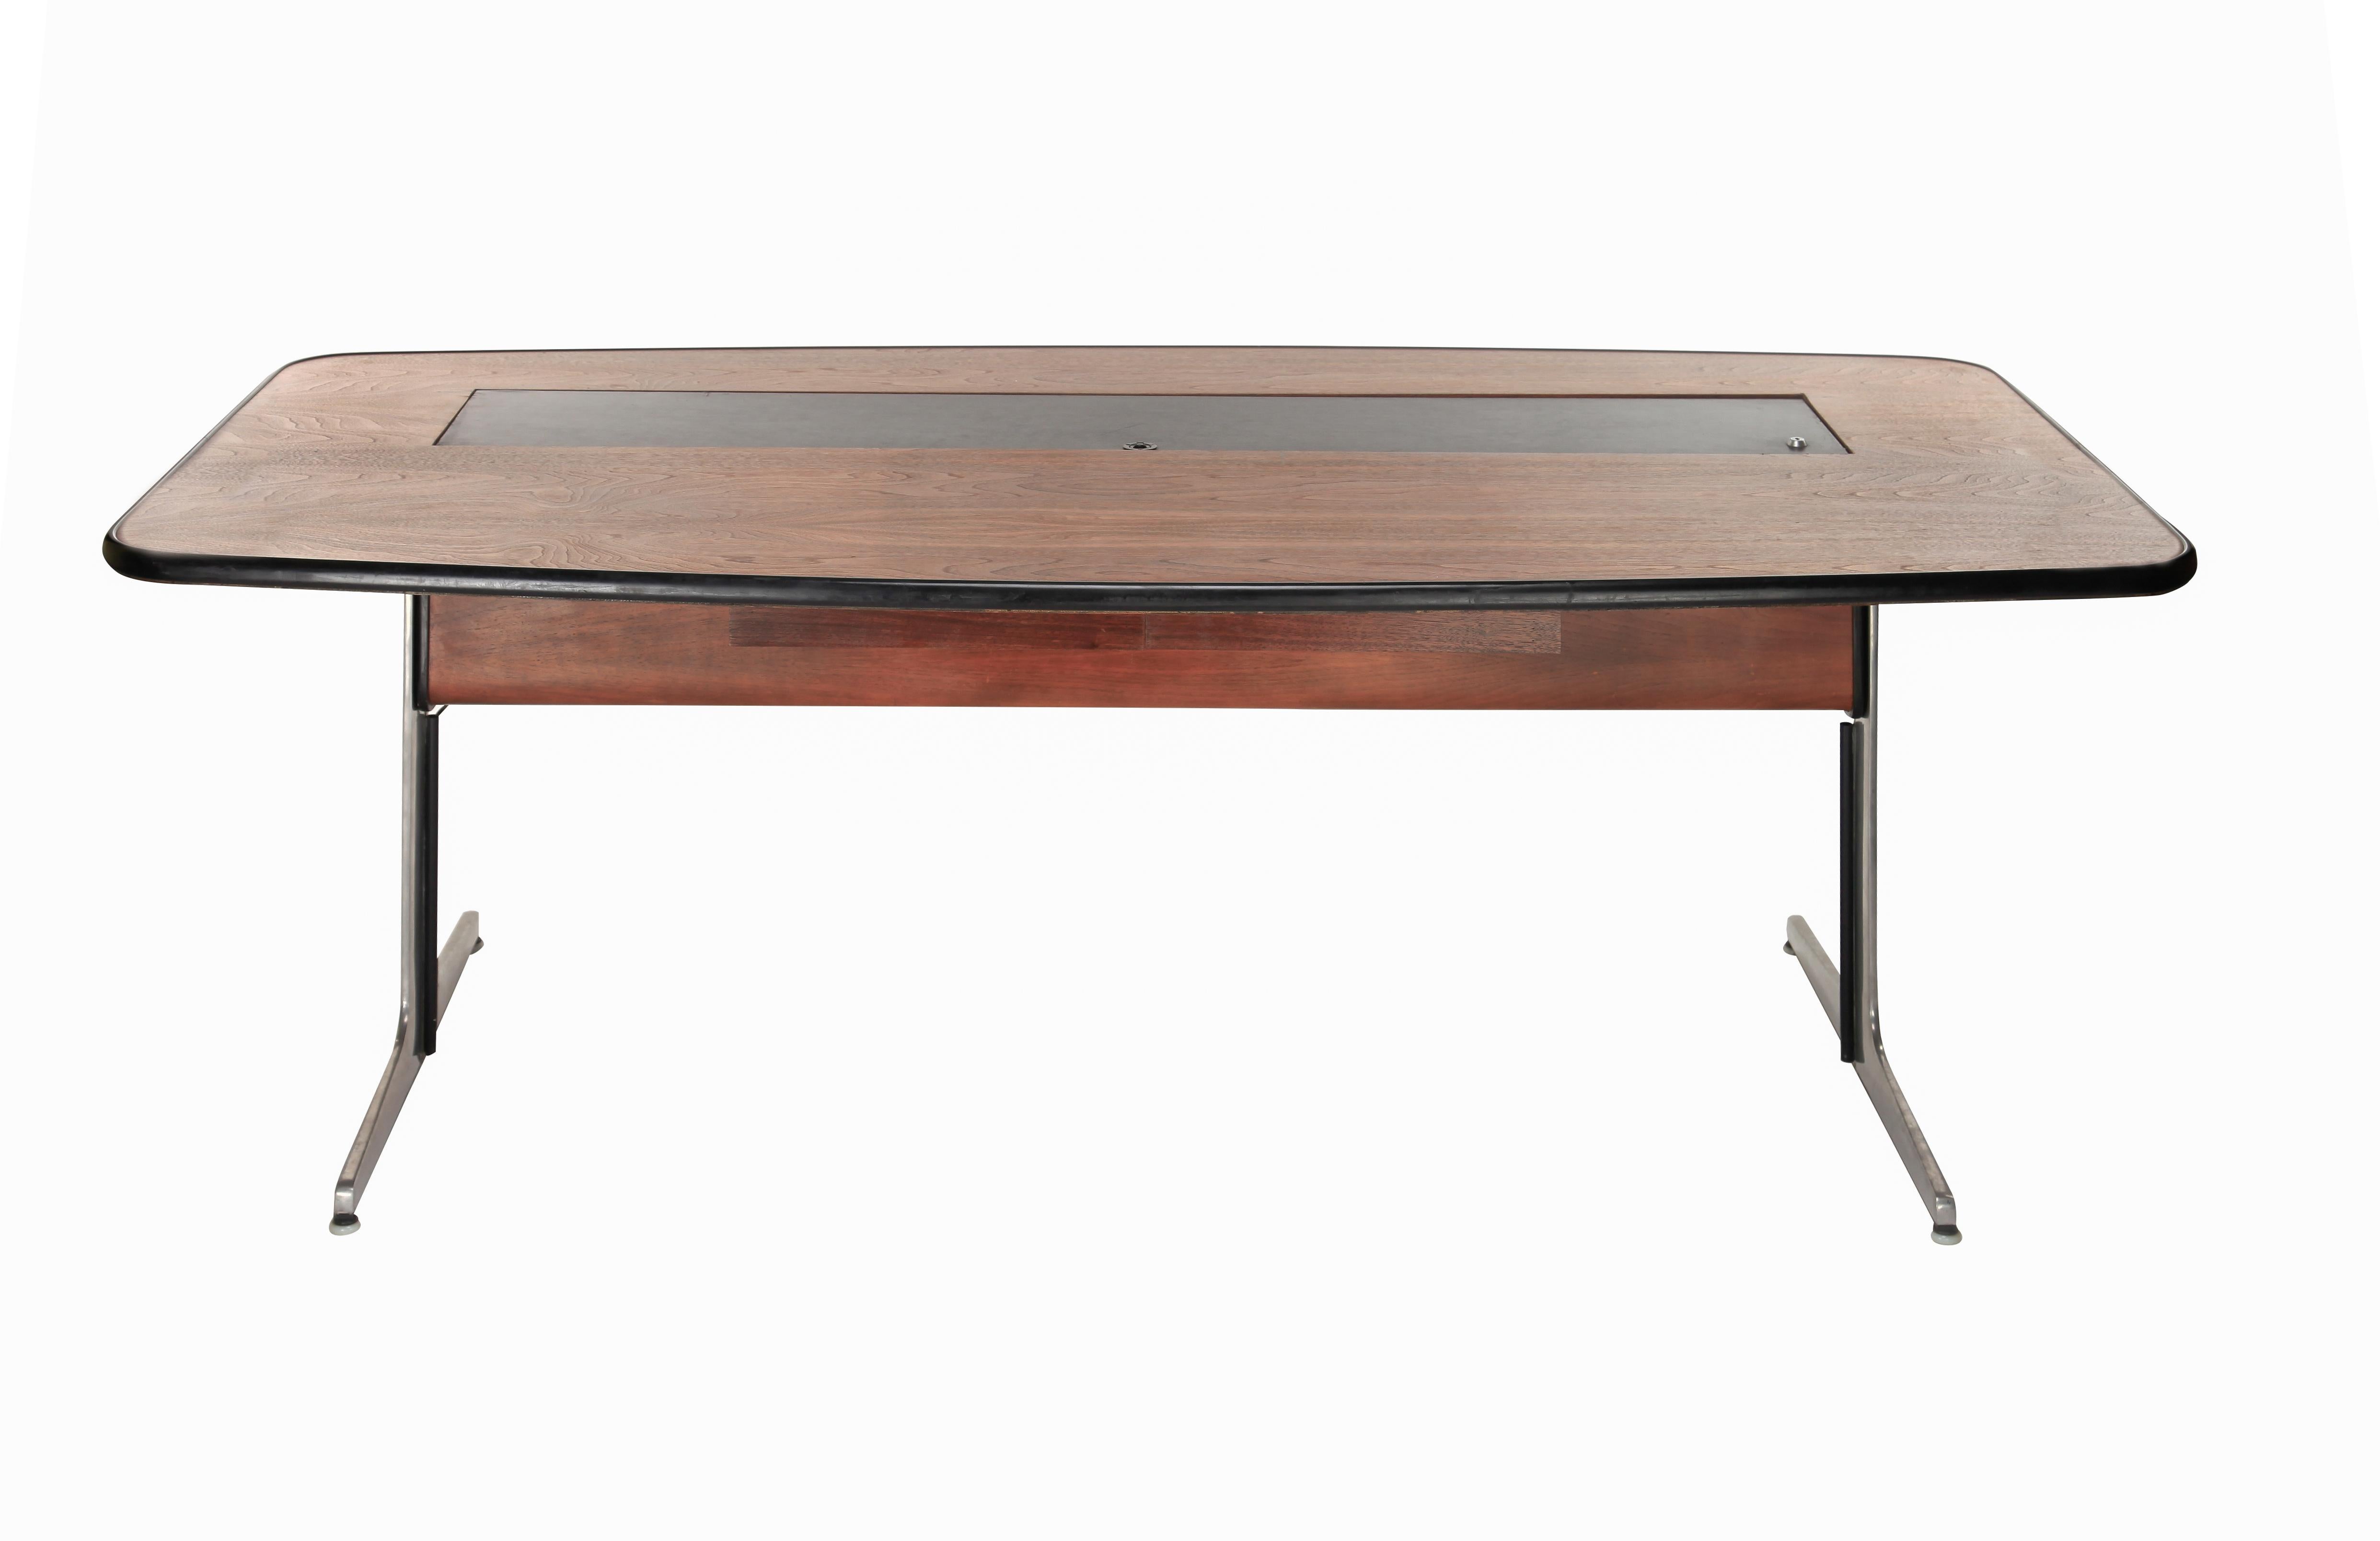 1960s walnut and leather desk by George Nelson for Herman Miller. Executed in walnut with leather lift top (with key) covering center filing compartment, which illuminates and contains two fitted drawers on a cantilevered brushed aluminum